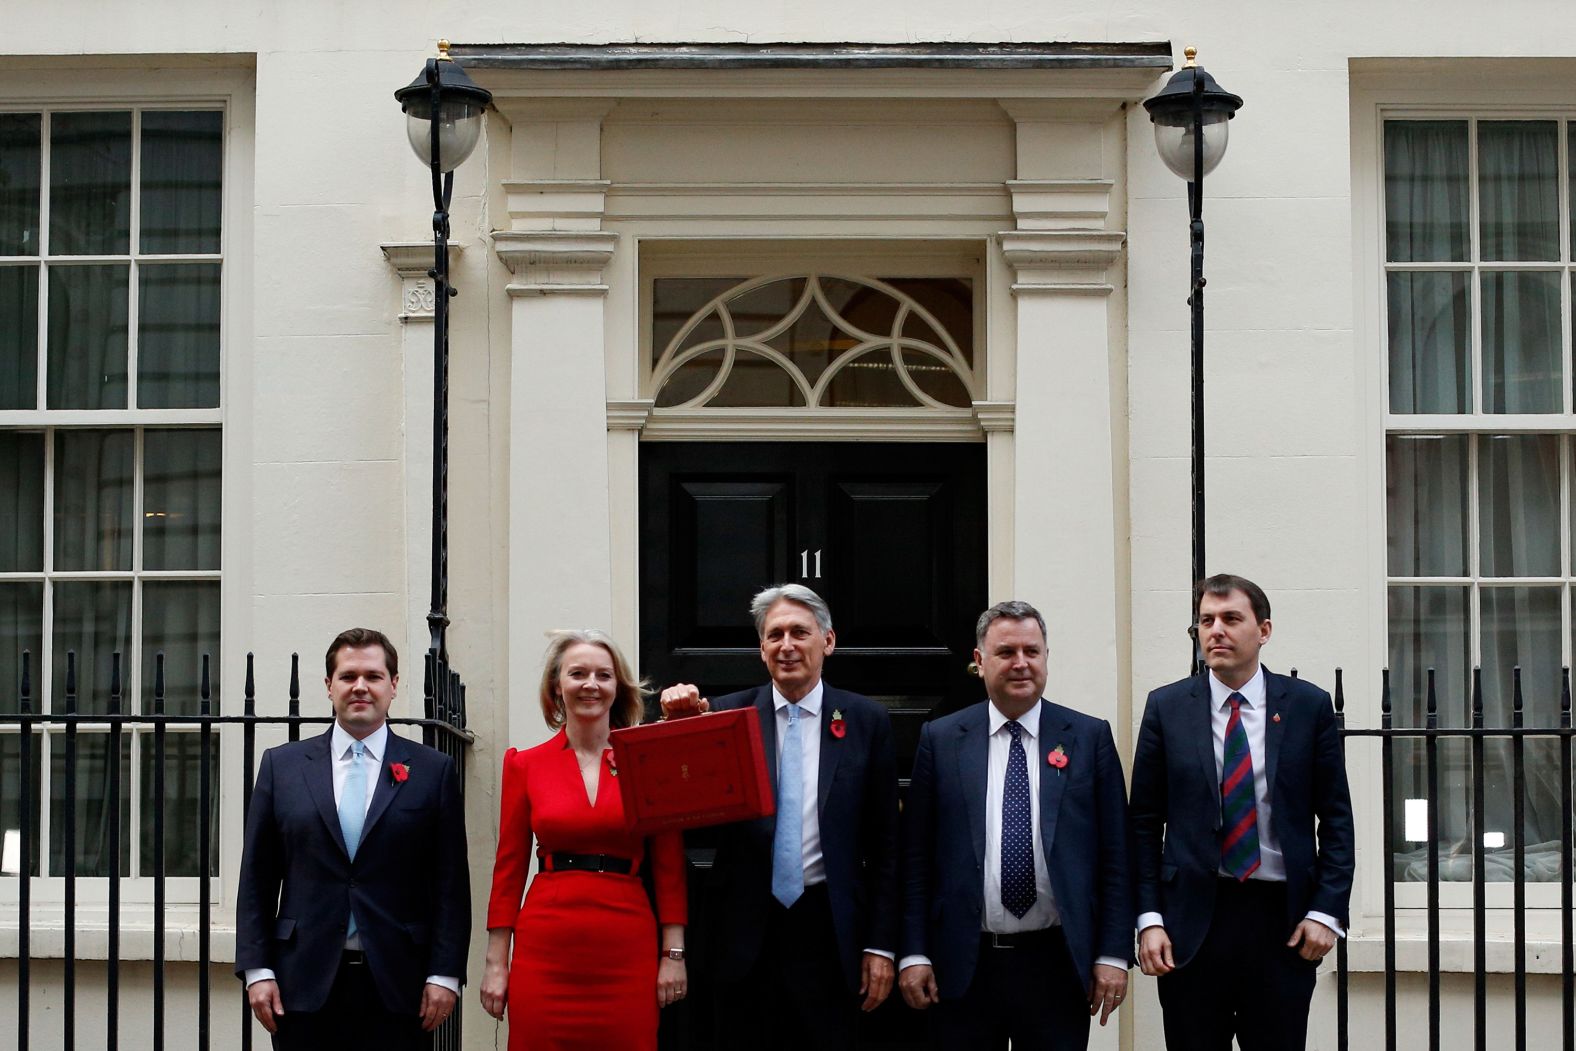 Truss, then as chief secretary to the Treasury, joins Chancellor of the Exchequer Philip Hammond and other members of the Treasury team before they presented the government's annual budget to Parliament in 2018.